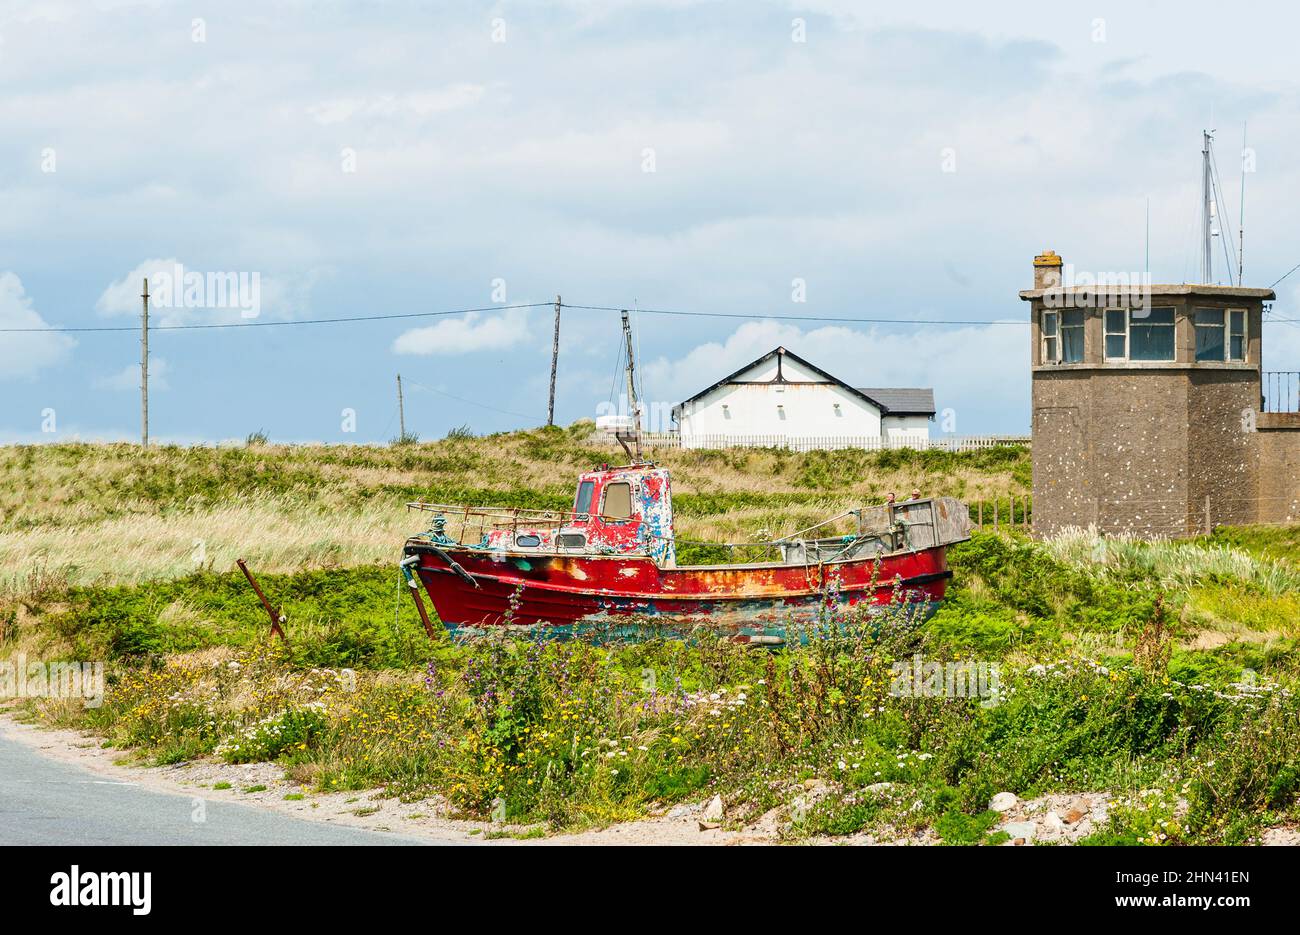 Red fisherman boat abandoned by a road. Forgotten, forsaken fishing trawler in the grass. Fishing dying business or industry. County Wexford, Ireland Stock Photo